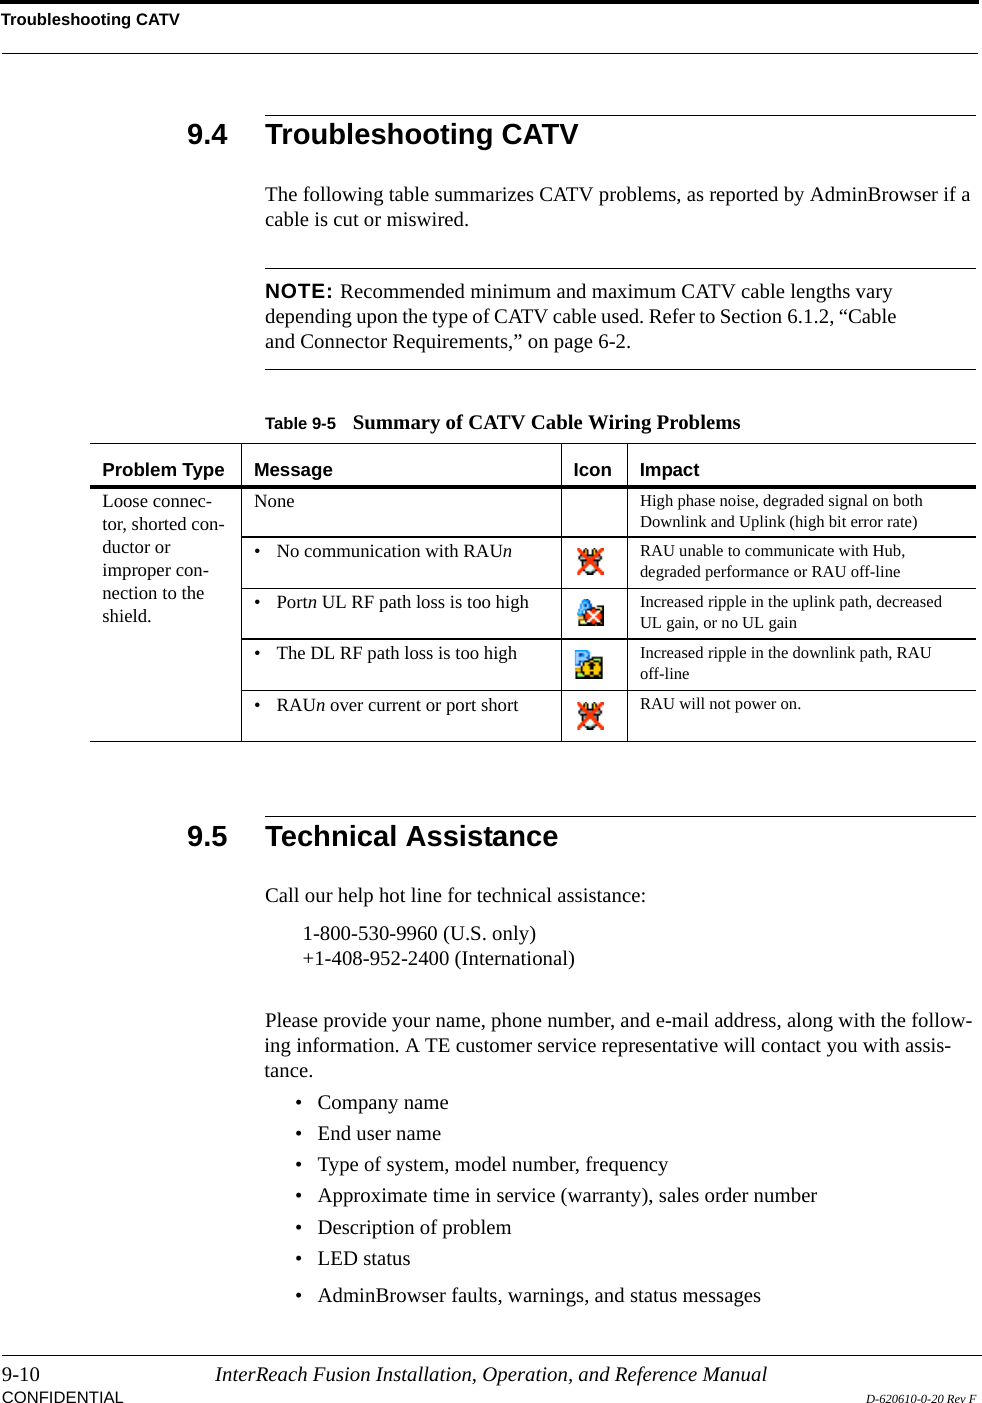 Troubleshooting CATV9-10 InterReach Fusion Installation, Operation, and Reference ManualCONFIDENTIAL D-620610-0-20 Rev F9.4 Troubleshooting CATVThe following table summarizes CATV problems, as reported by AdminBrowser if a cable is cut or miswired.NOTE: Recommended minimum and maximum CATV cable lengths vary depending upon the type of CATV cable used. Refer to Section 6.1.2, “Cable and Connector Requirements,” on page 6-2.9.5 Technical AssistanceCall our help hot line for technical assistance:1-800-530-9960 (U.S. only)+1-408-952-2400 (International)Please provide your name, phone number, and e-mail address, along with the follow-ing information. A TE customer service representative will contact you with assis-tance.• Company name• End user name• Type of system, model number, frequency• Approximate time in service (warranty), sales order number• Description of problem• LED status• AdminBrowser faults, warnings, and status messagesTable 9-5 Summary of CATV Cable Wiring ProblemsProblem Type Message Icon ImpactLoose connec-tor, shorted con-ductor or improper con-nection to the shield.None High phase noise, degraded signal on both Downlink and Uplink (high bit error rate)• No communication with RAUn  RAU unable to communicate with Hub, degraded performance or RAU off-line• Portn UL RF path loss is too high Increased ripple in the uplink path, decreased UL gain, or no UL gain• The DL RF path loss is too high Increased ripple in the downlink path, RAU off-line•RAUn over current or port short RAU will not power on.